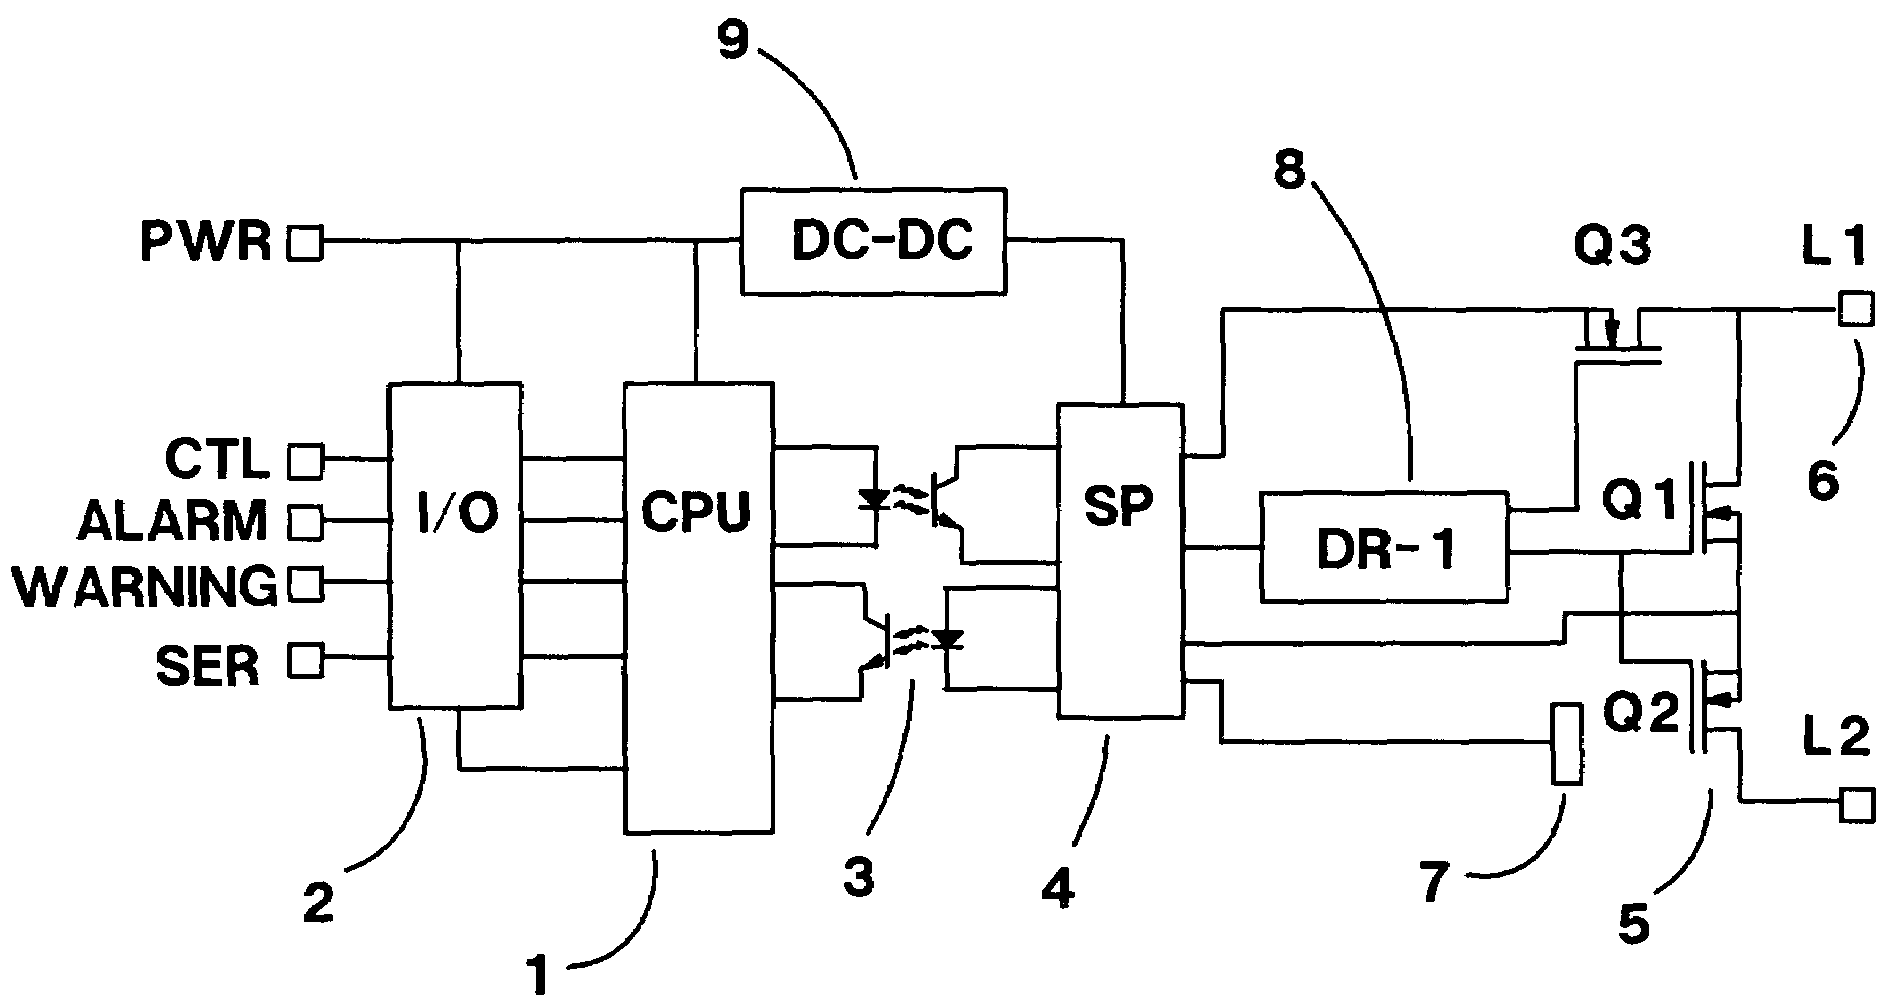 Intelligent solid state relay/breaker